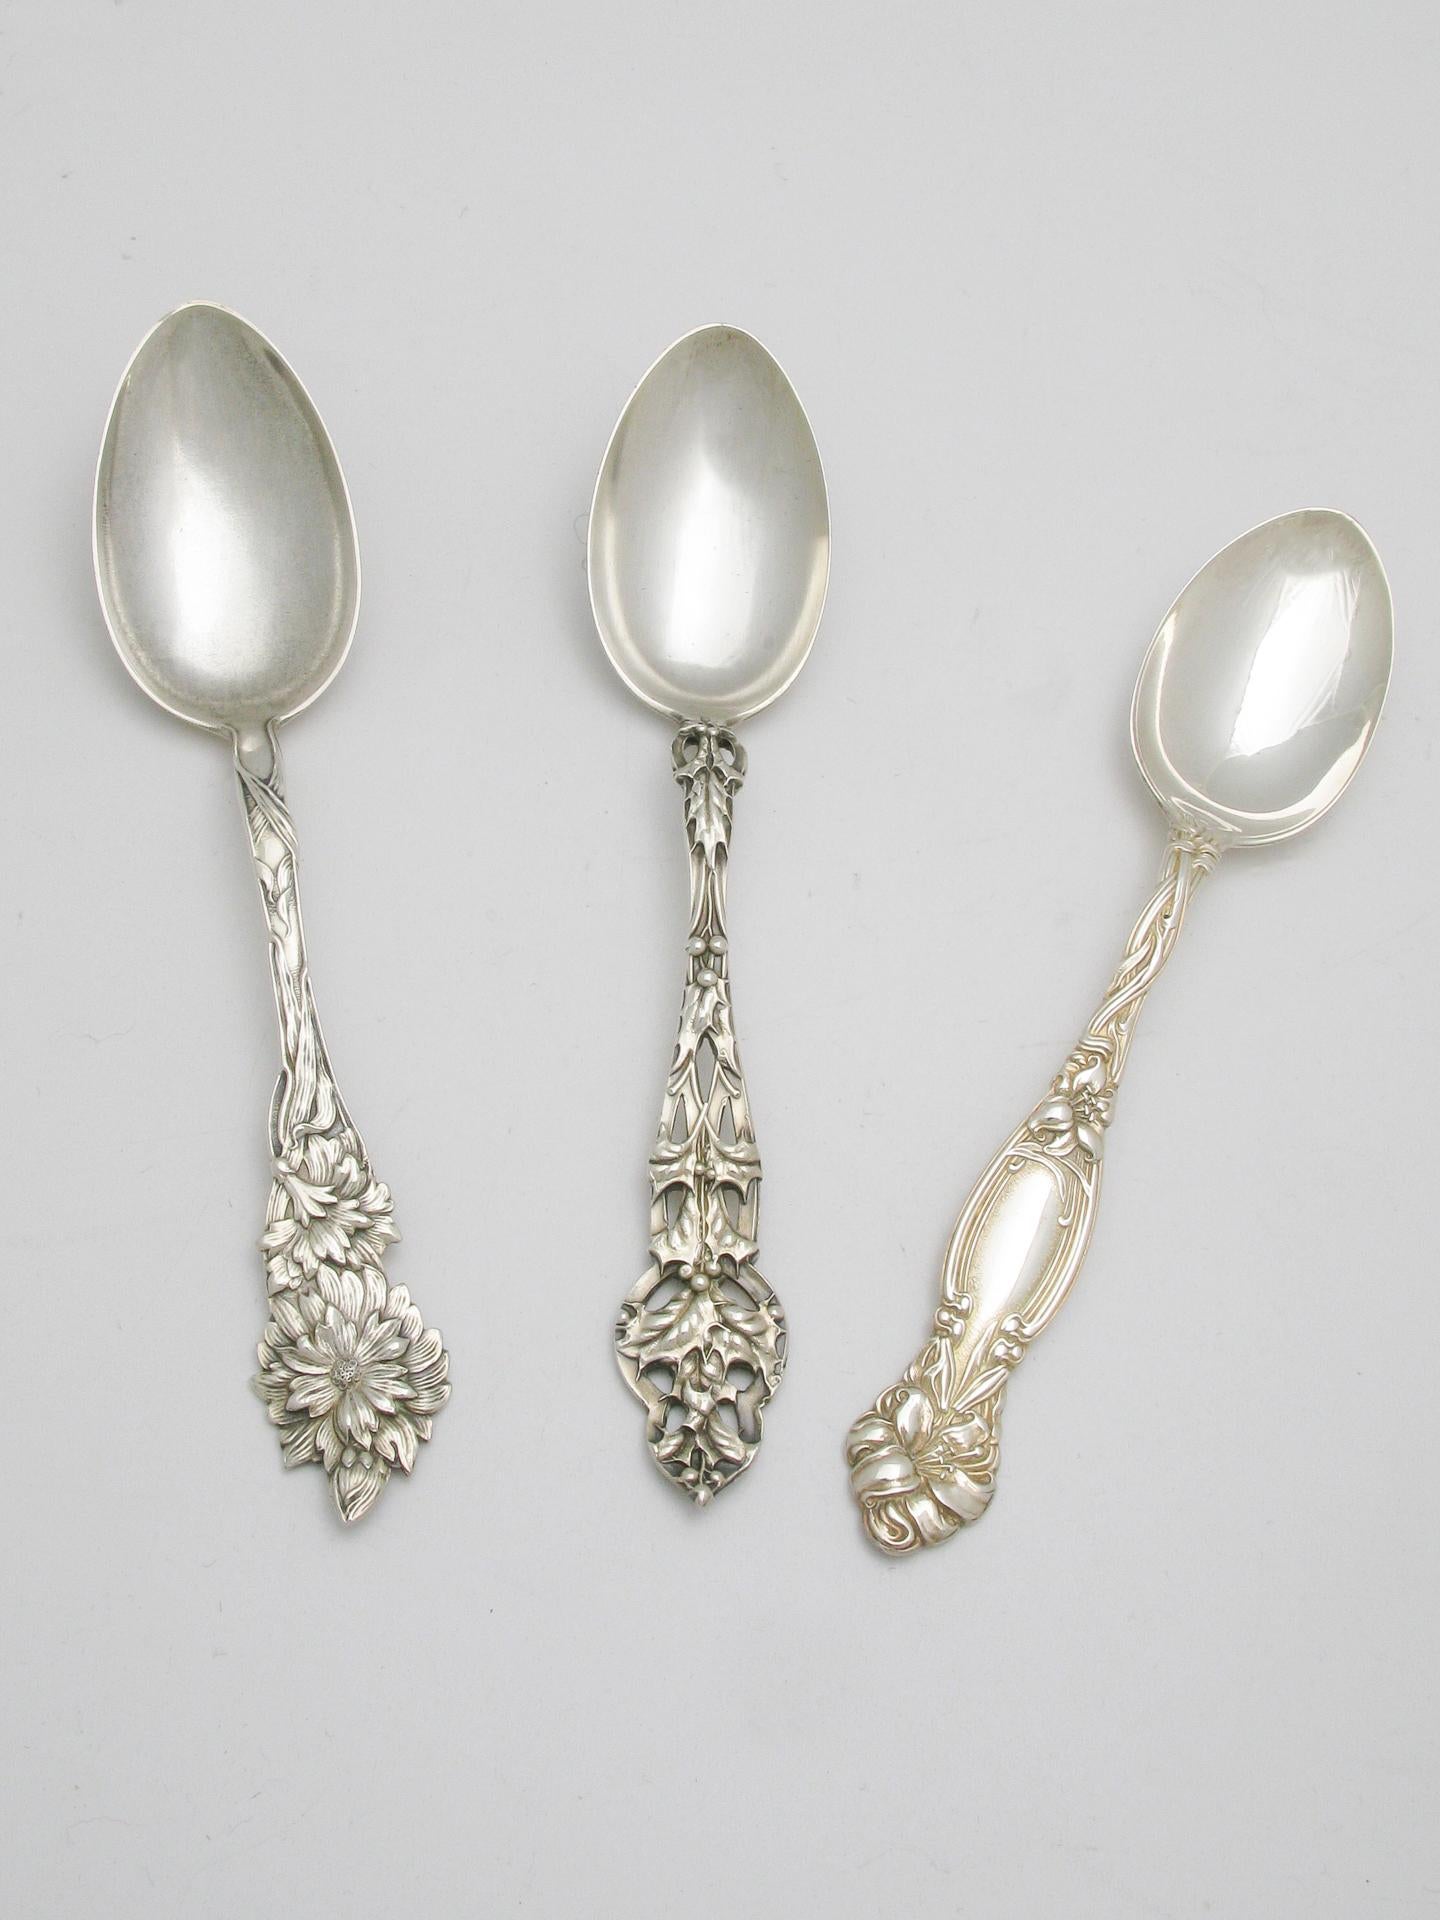 Three Tiffany and Co. sterling silver teaspoons, with assorted beautiful decorations in the pattern Holly: perfect and rare.
They are three little sculptures, to be used and admired. Treat Yourself to this luxury!